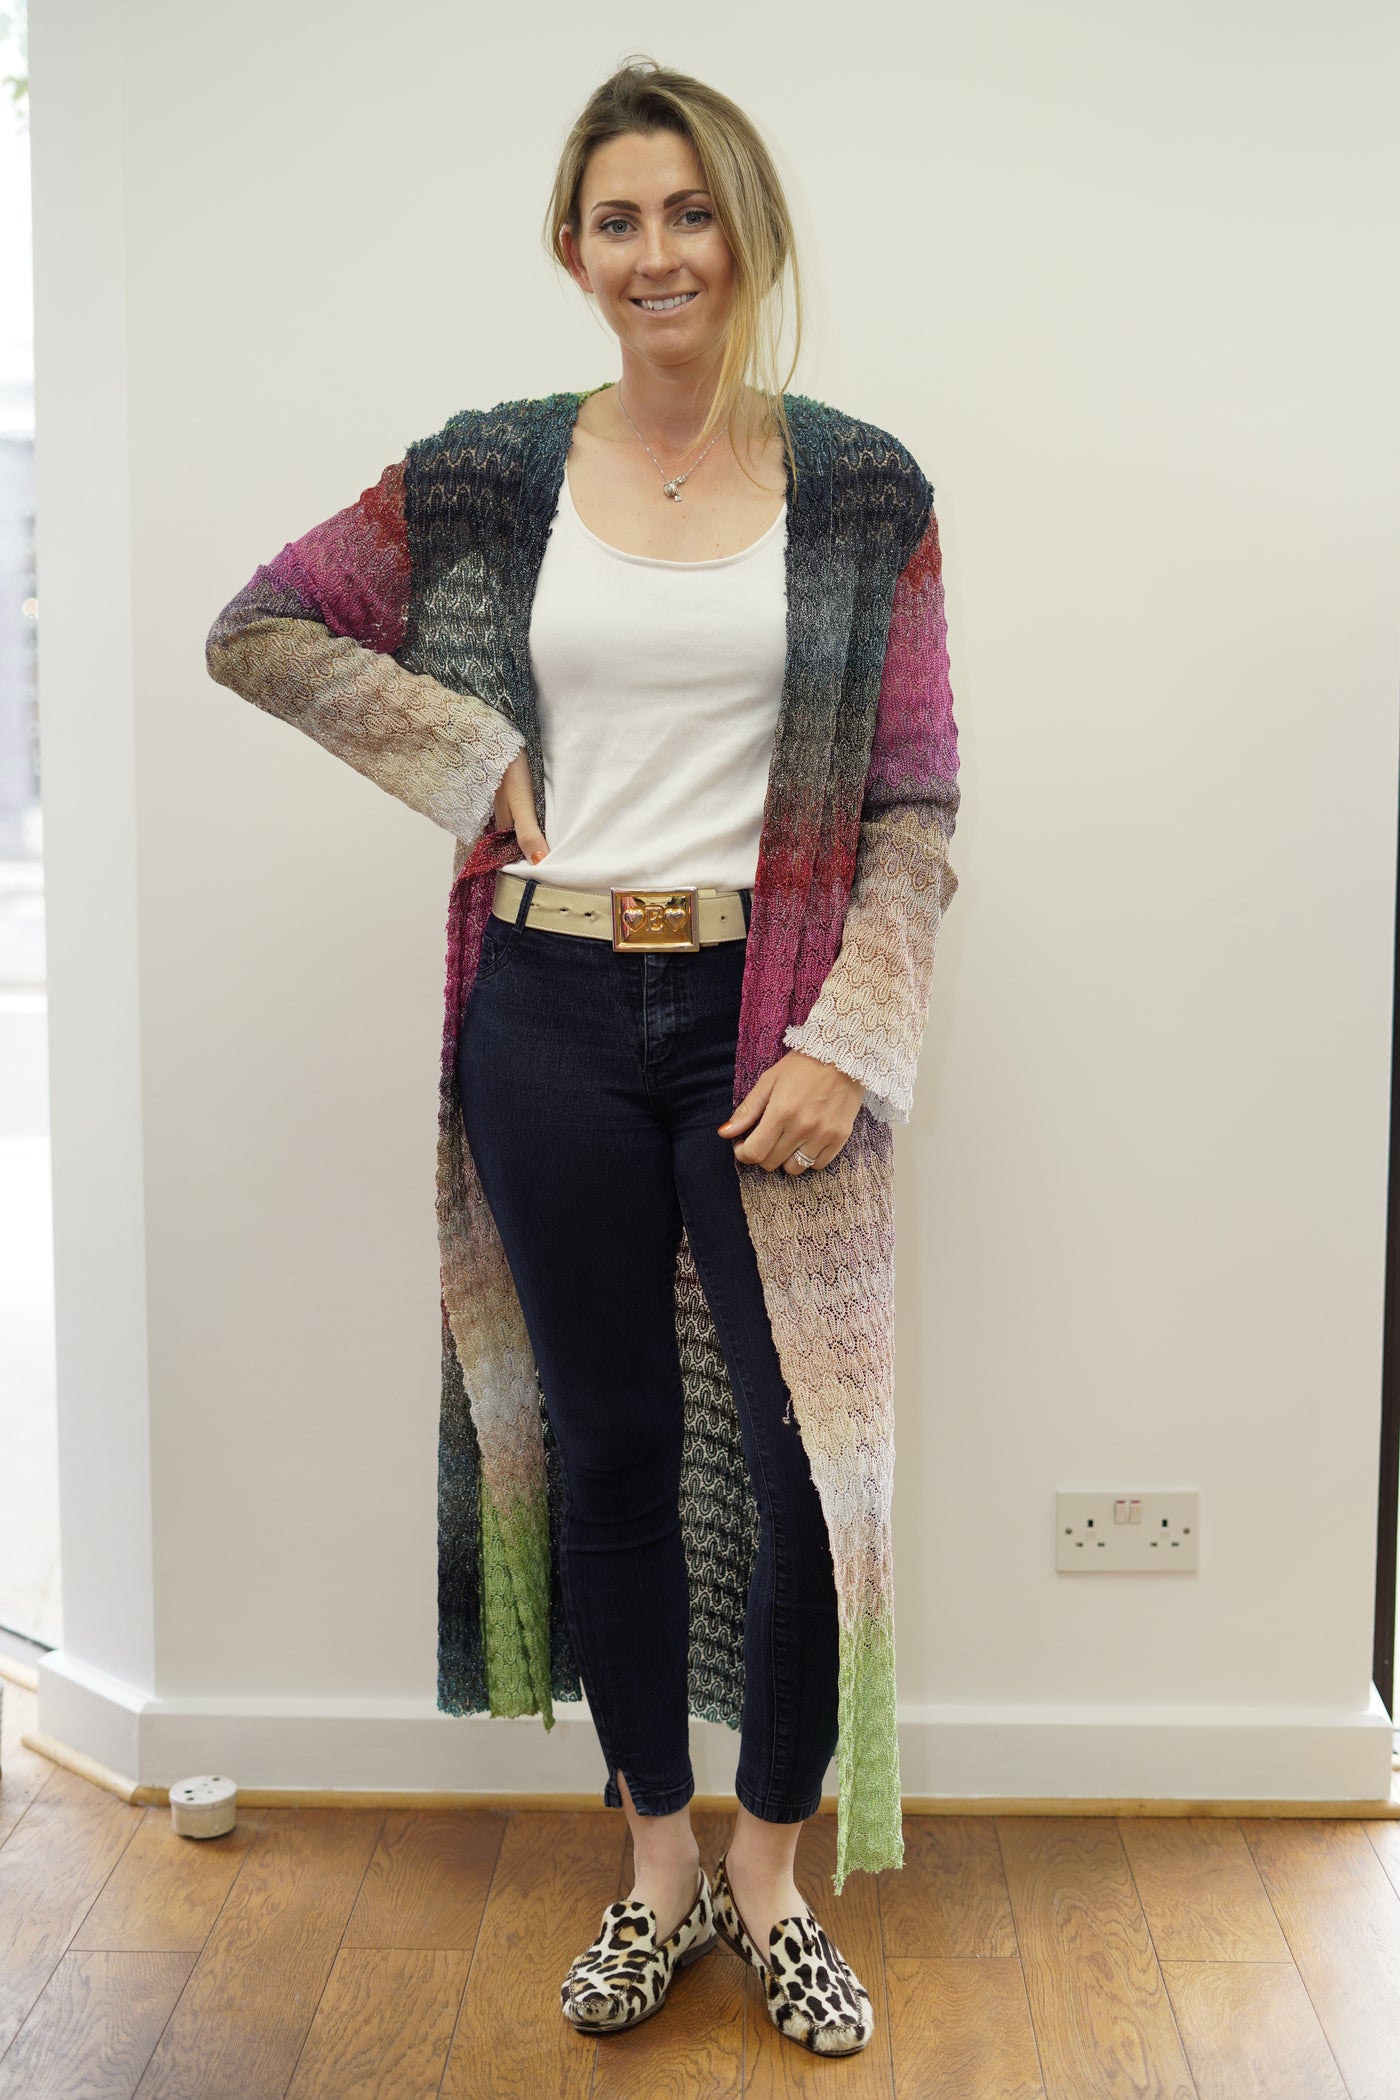 Missoni cardigan new without tags size 46 RTP £850